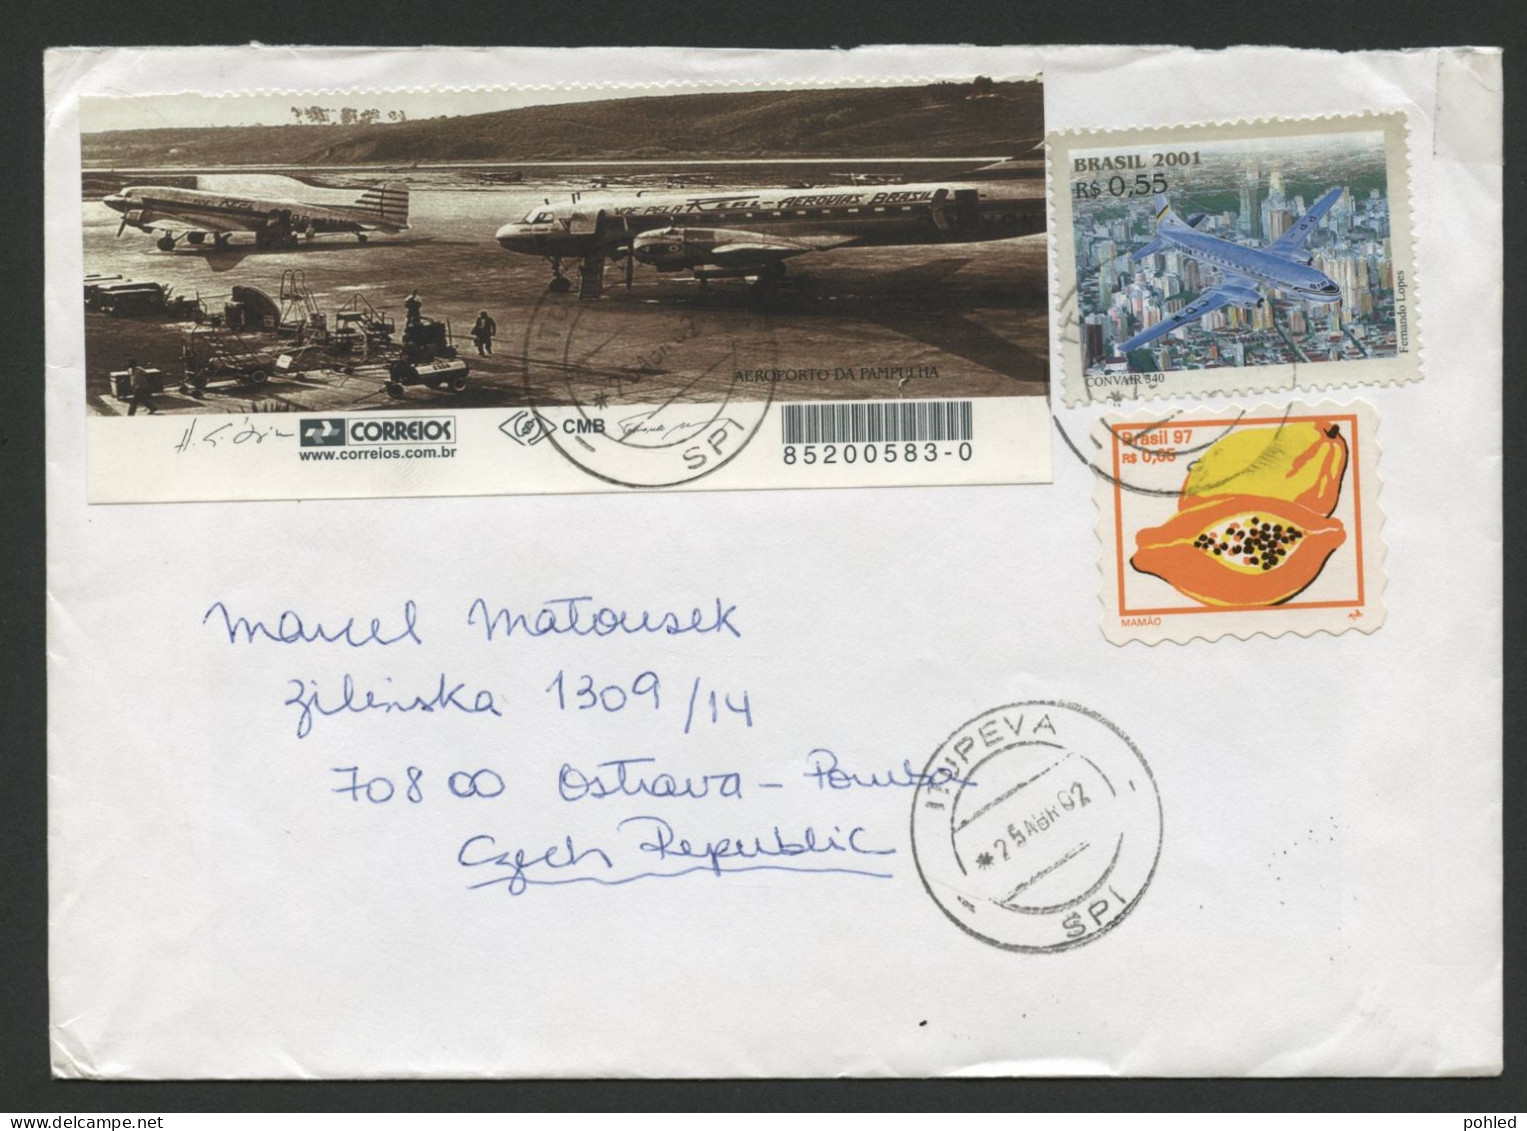 01255*BRAZIL To CZECHOSLOVAKIA*AIRMAIL COVER*2002 - Covers & Documents